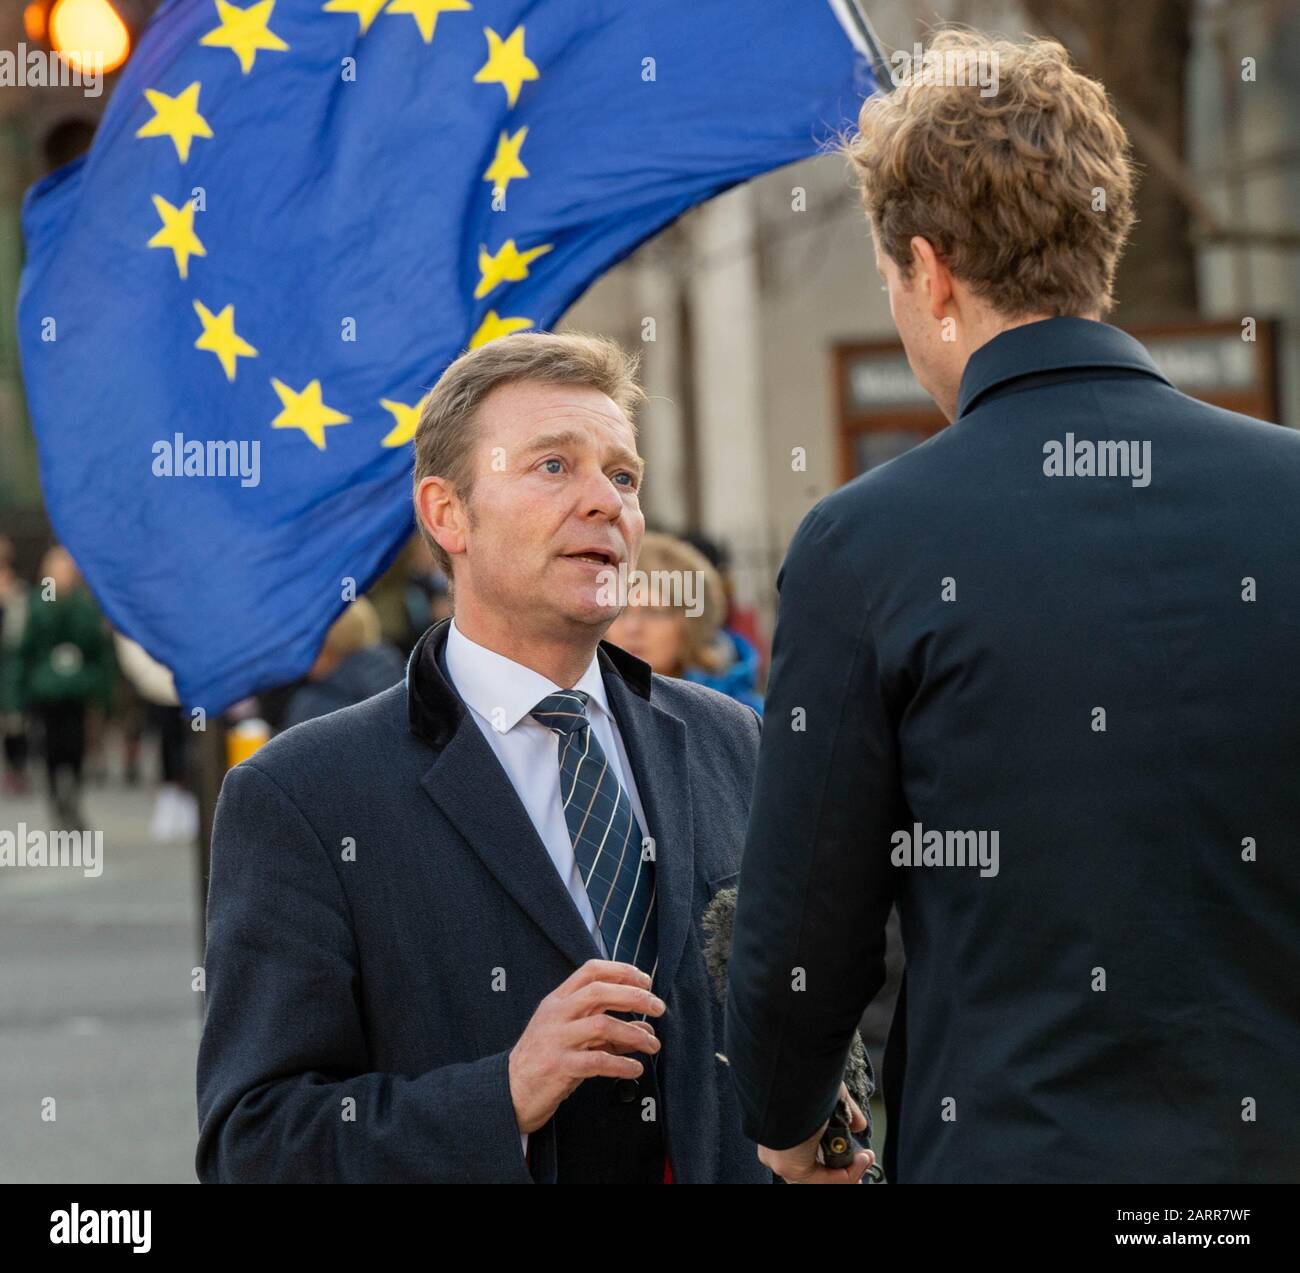 London, UK. 29th Jan, 2020. Craig Mackinlay, Member of Parliament for South Thanet. Being interviewed outside the House of Commons. Initially a member of the UK Independence Party, Mackinlay served as deputy leader of UKIP in 1997, before joining the Conservative Party in 200 London Credit: Ian Davidson/Alamy Live News Stock Photo